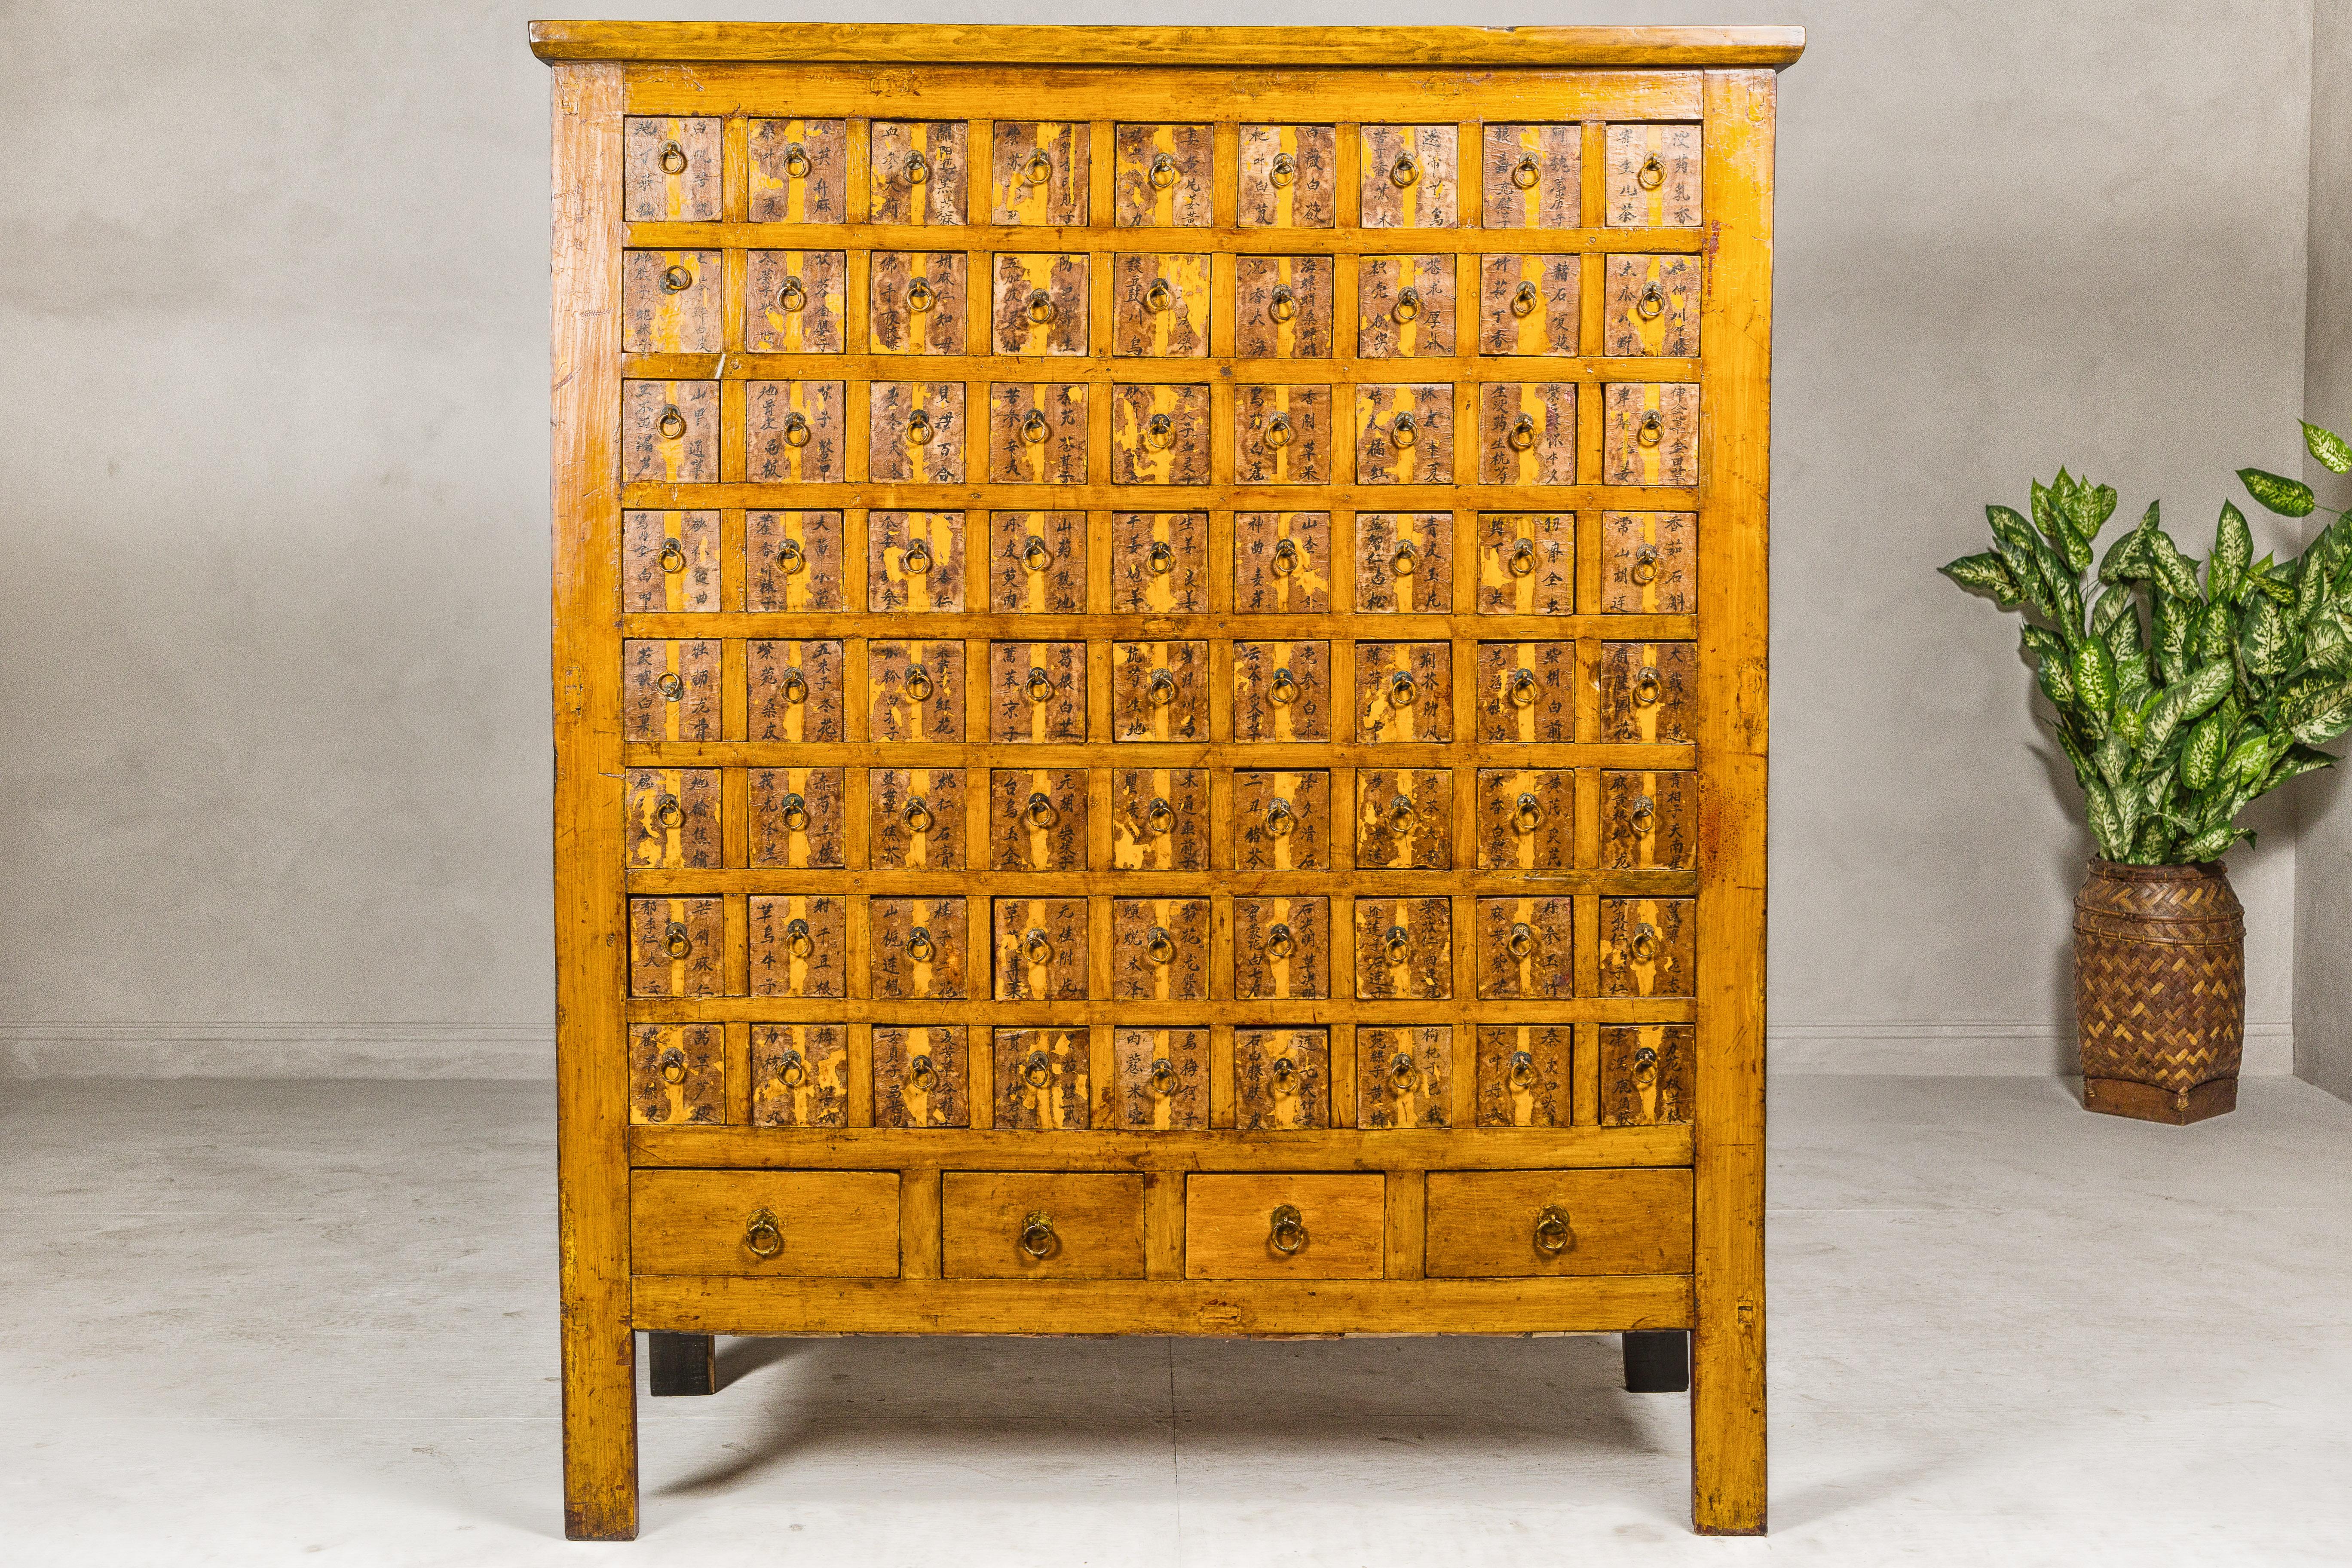 Lacquered Oversized Qing Apothecary Cabinet with 76 Drawers and Chinese Calligraphy For Sale